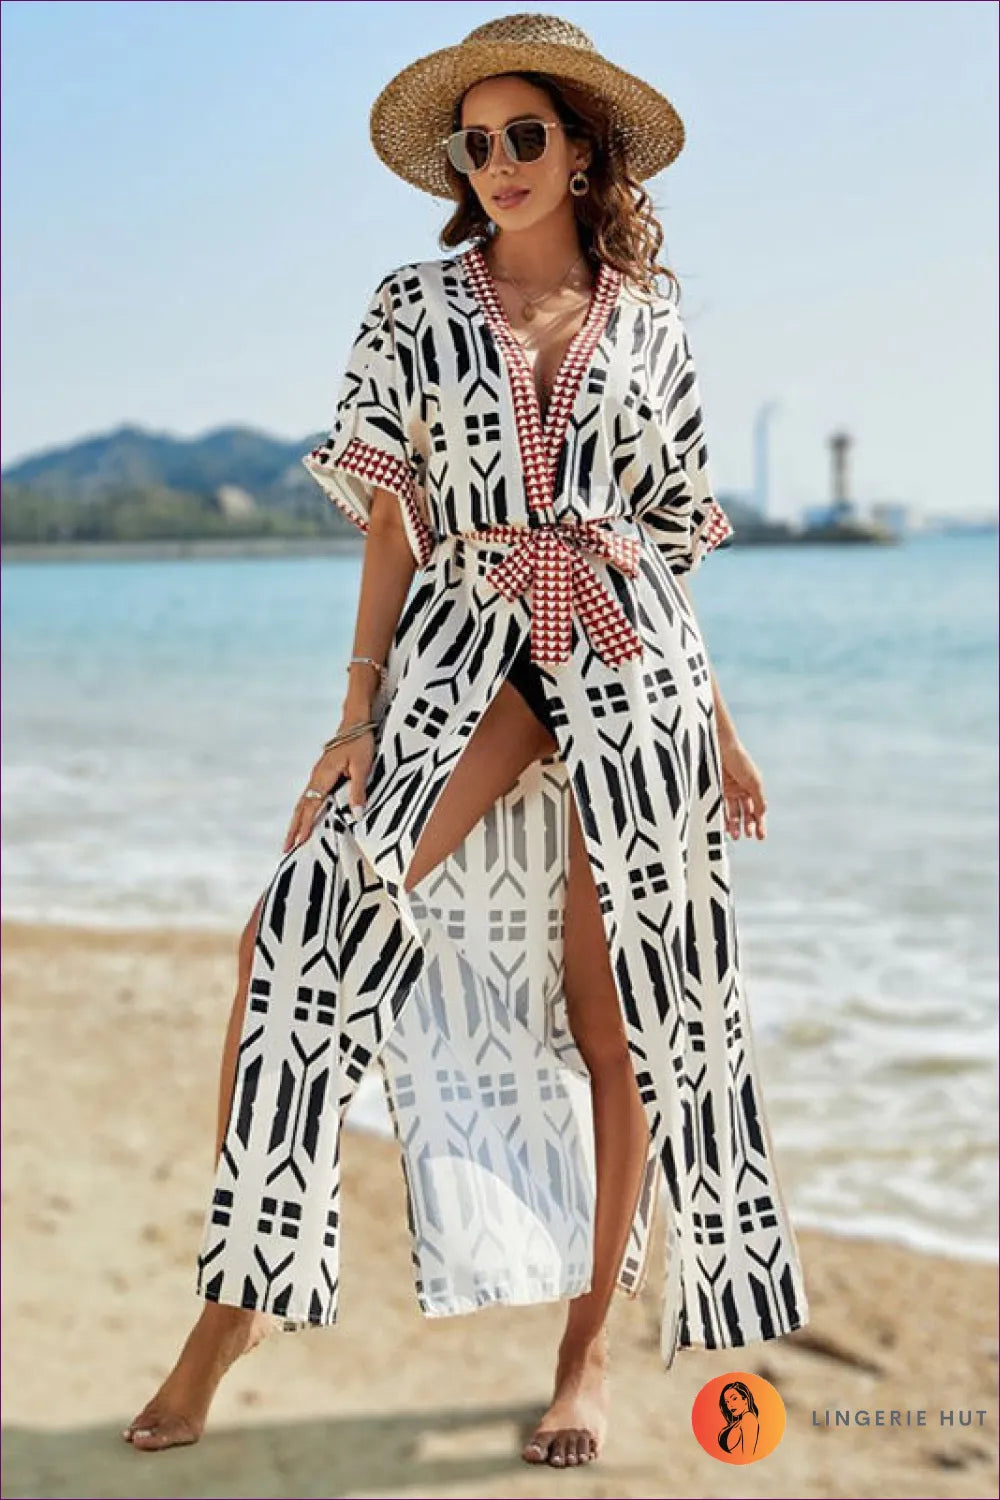 Get Ready For Summer Vibes With Our Boho Printed Beach Cover-up Cardigan. Embrace The Boho Style, Pair It